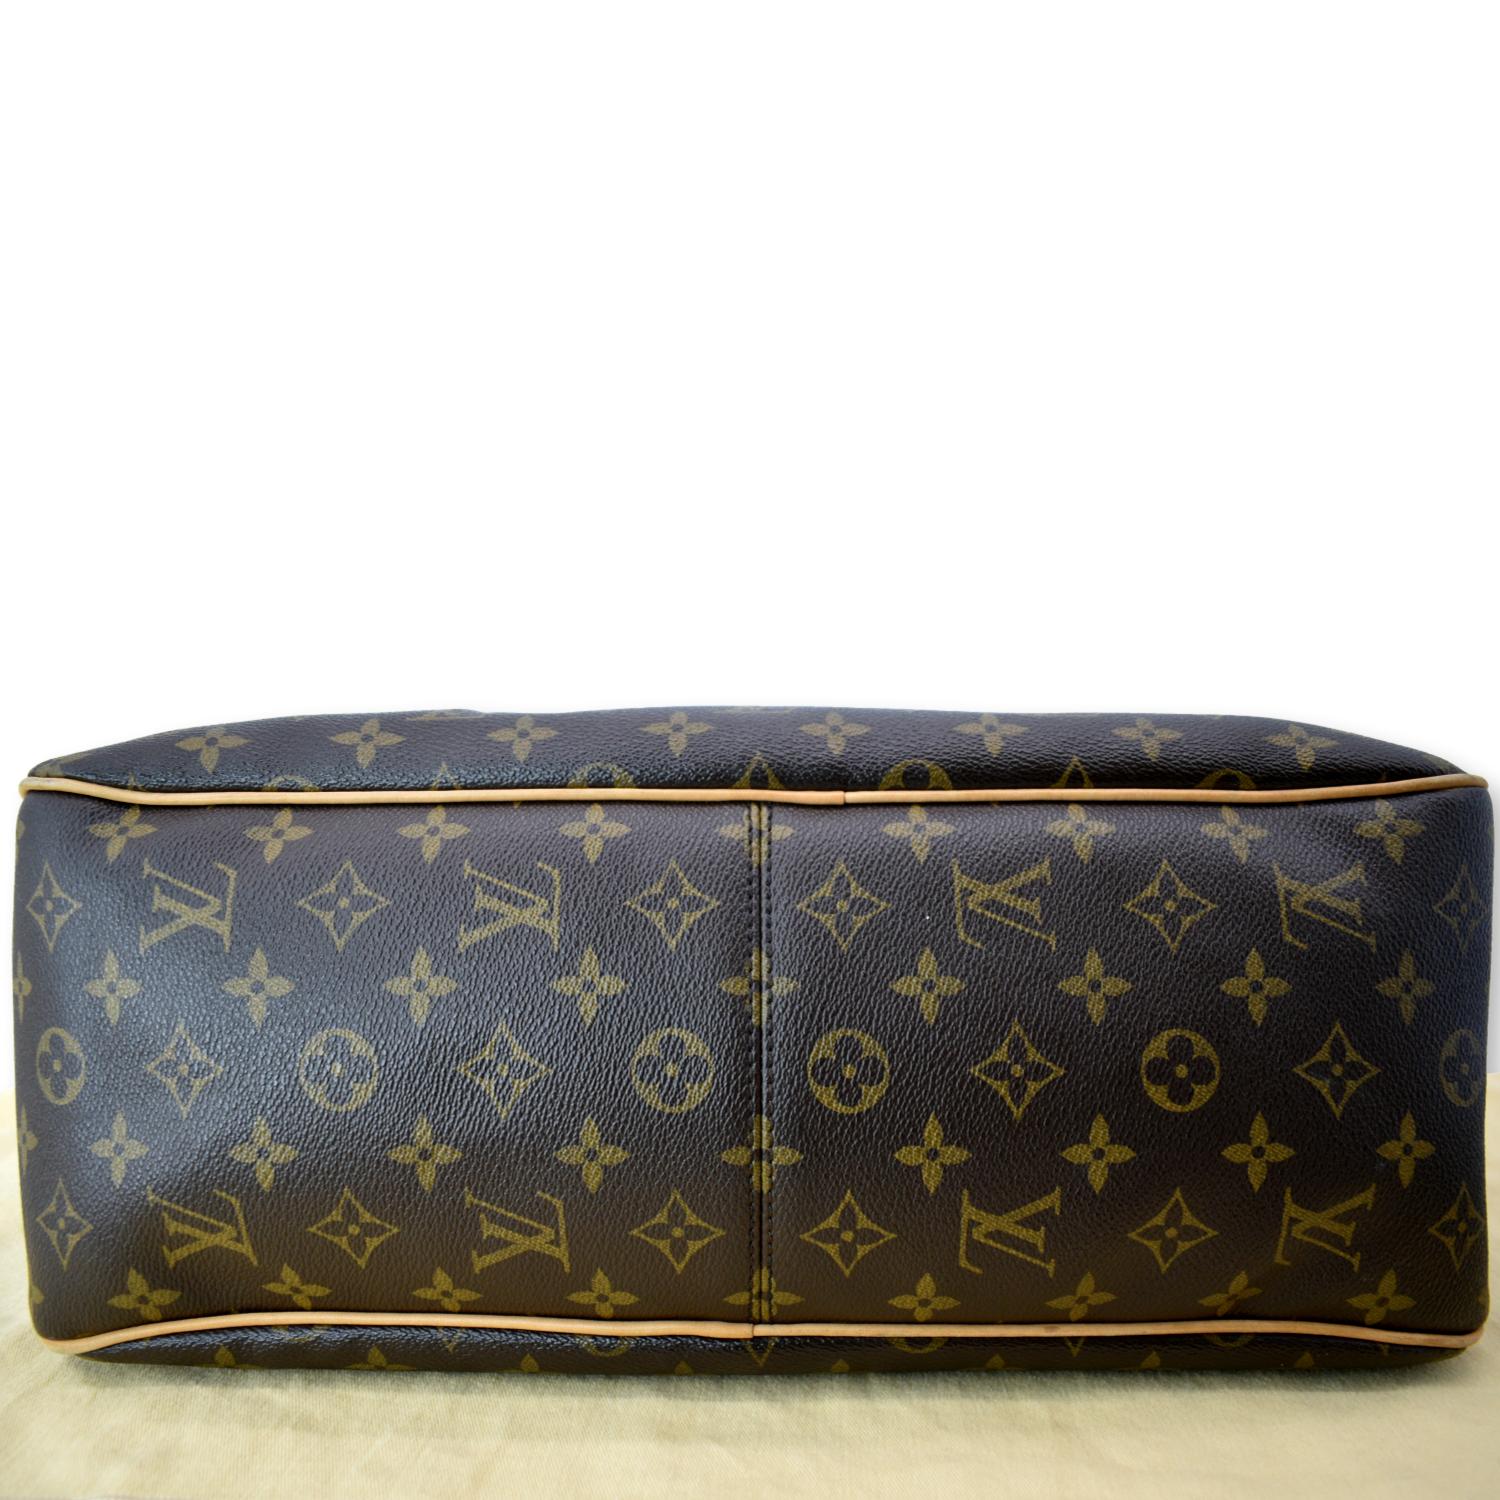 Designer Exchange Ltd - - LV DELIGHTFUL MM - Pay 30% today and the